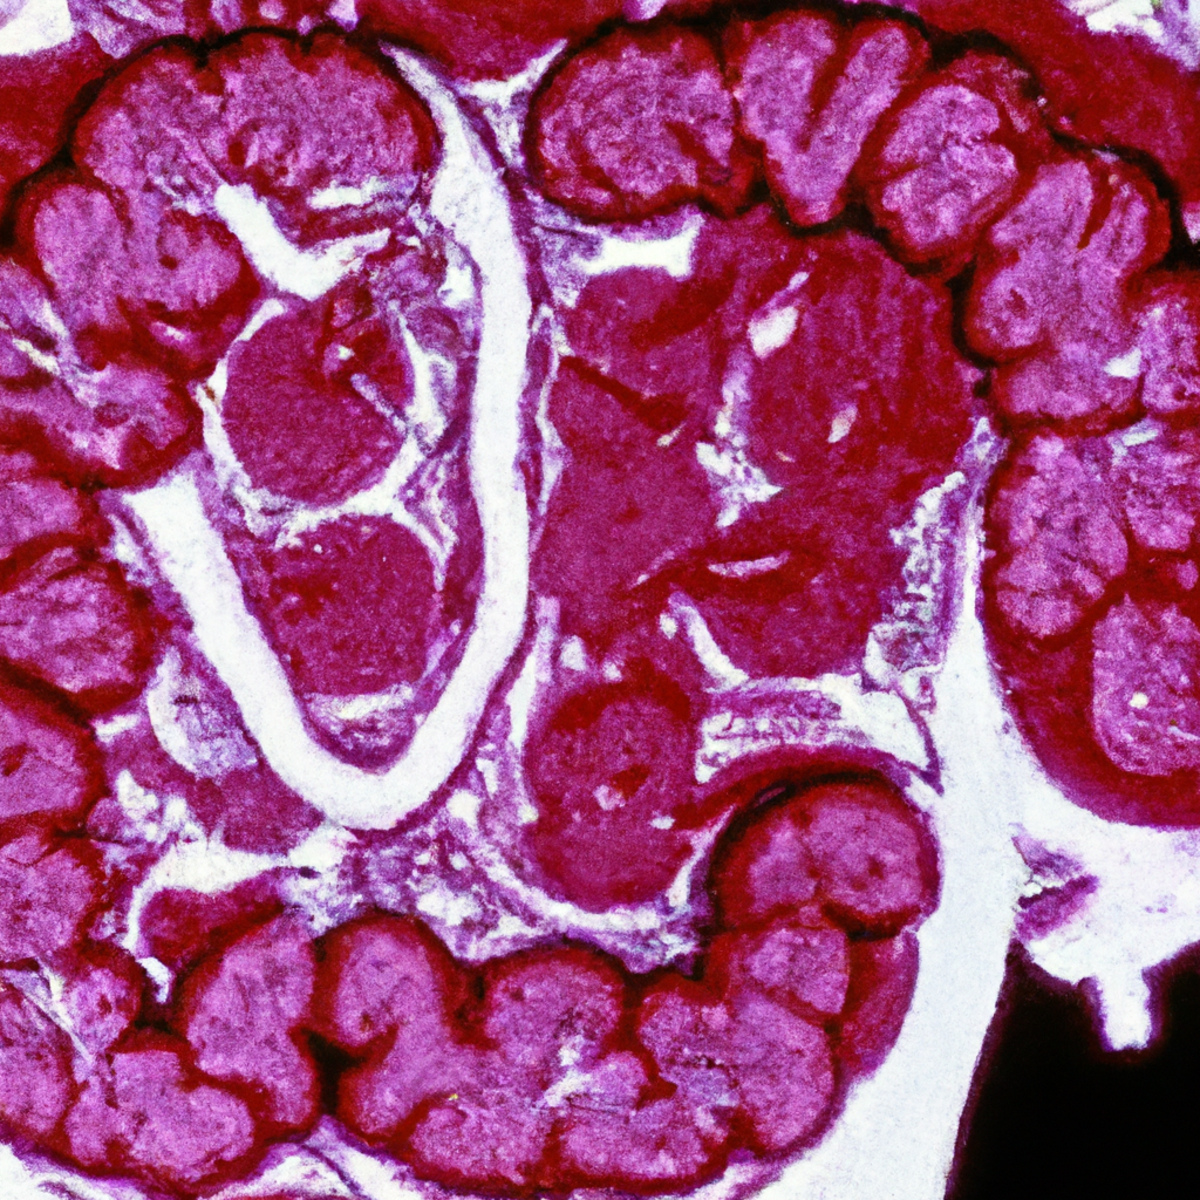 Close-up photo of enlarged spleen specimen with Castleman disease, showcasing intricate details of structure and surrounding tissues.